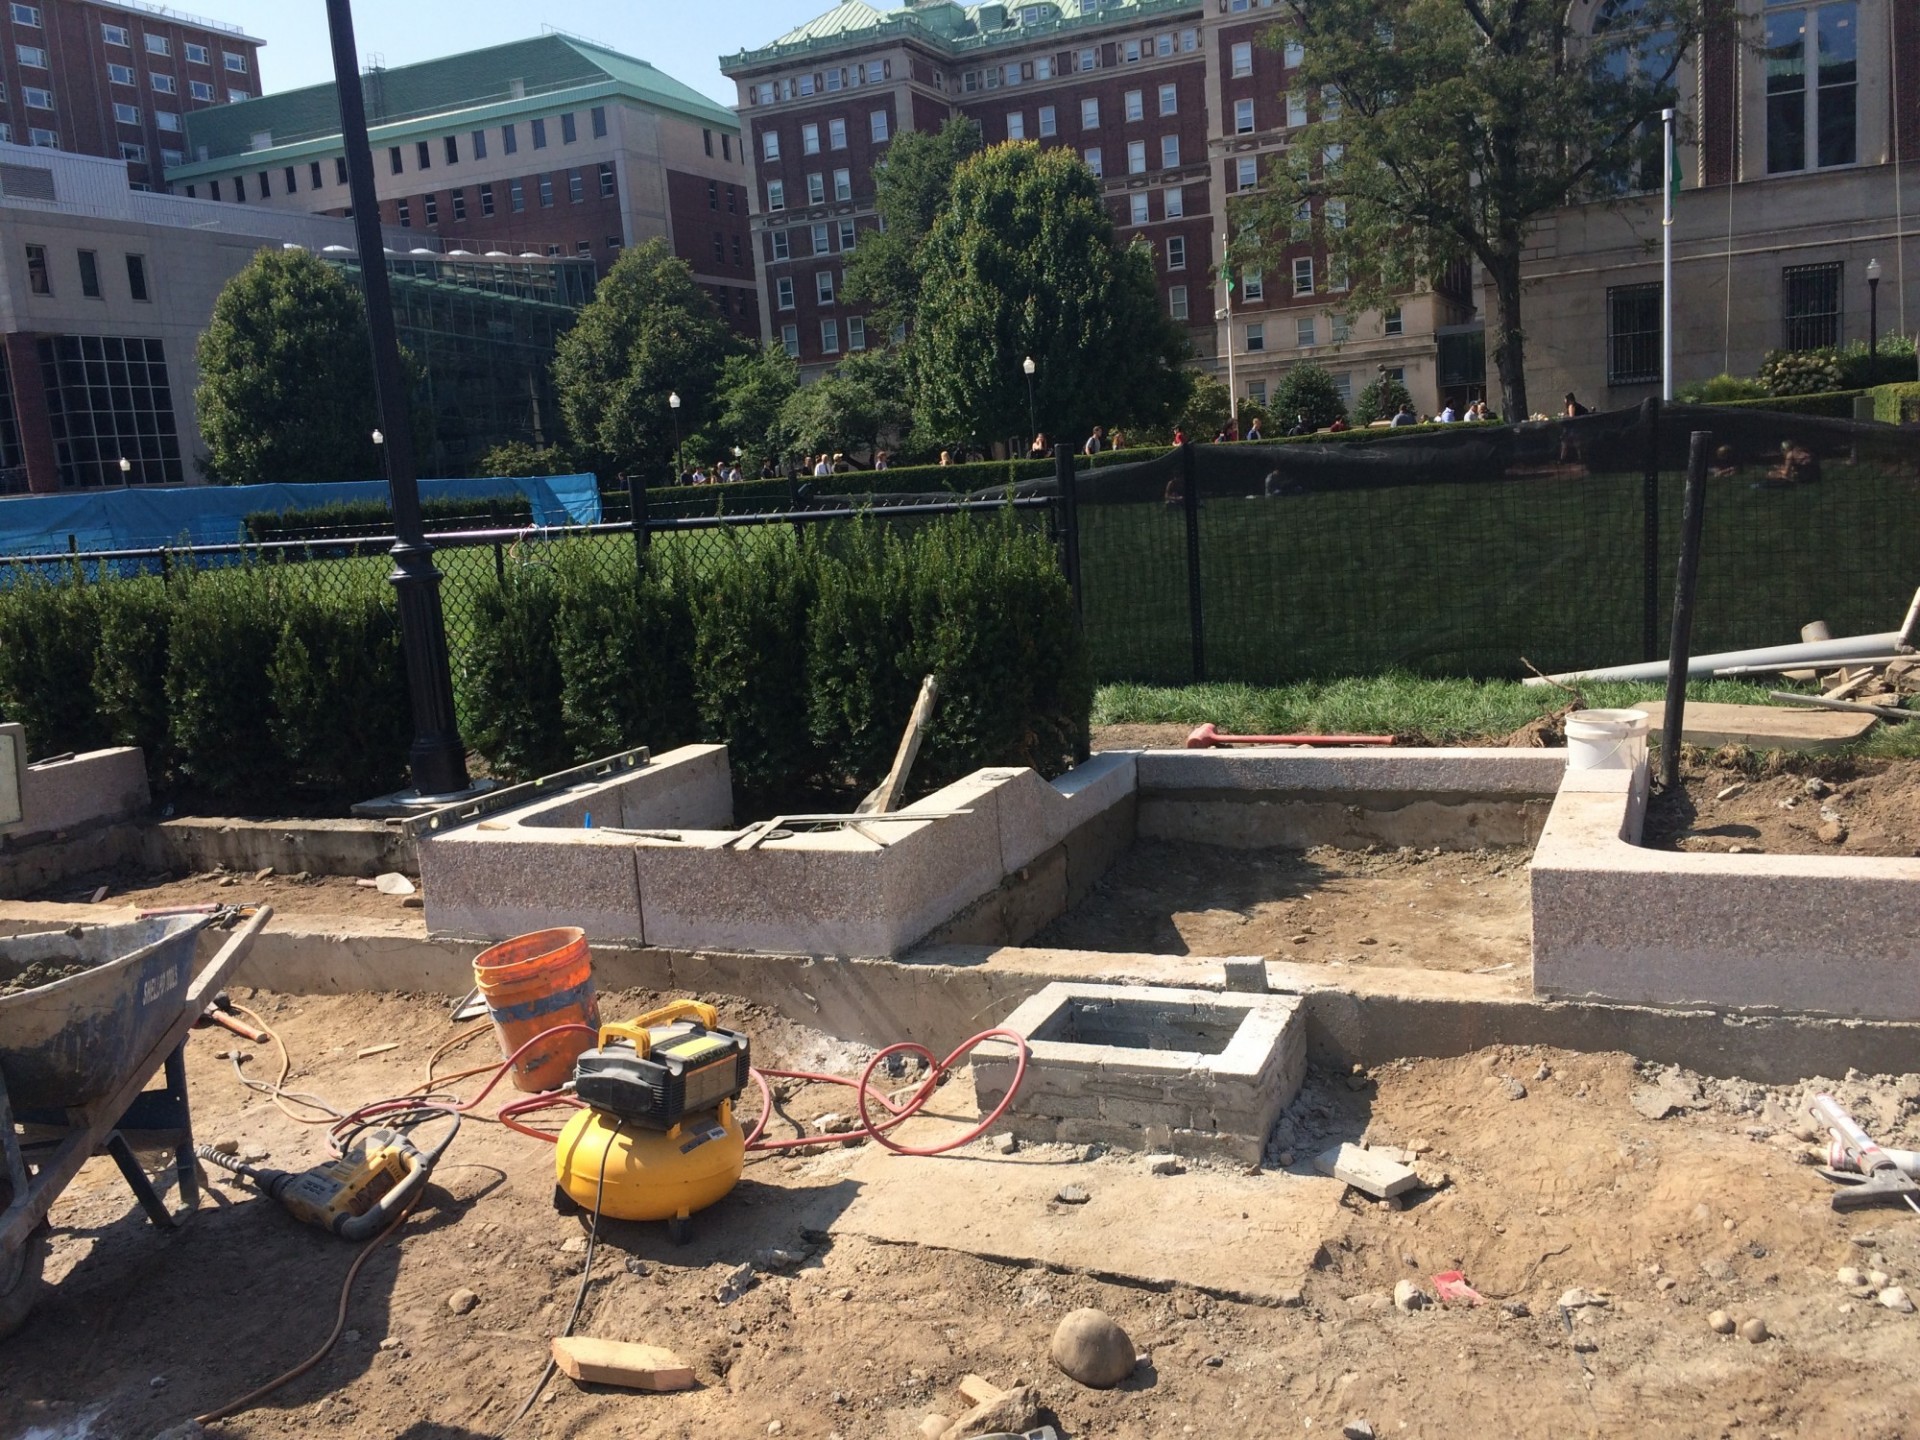 Areas for plantings and flowerbeds will be prominent along the pathway perimeters. Continuation of the granite curbing around the planting area can be seen in this image. (Photo from September 11, 2017)